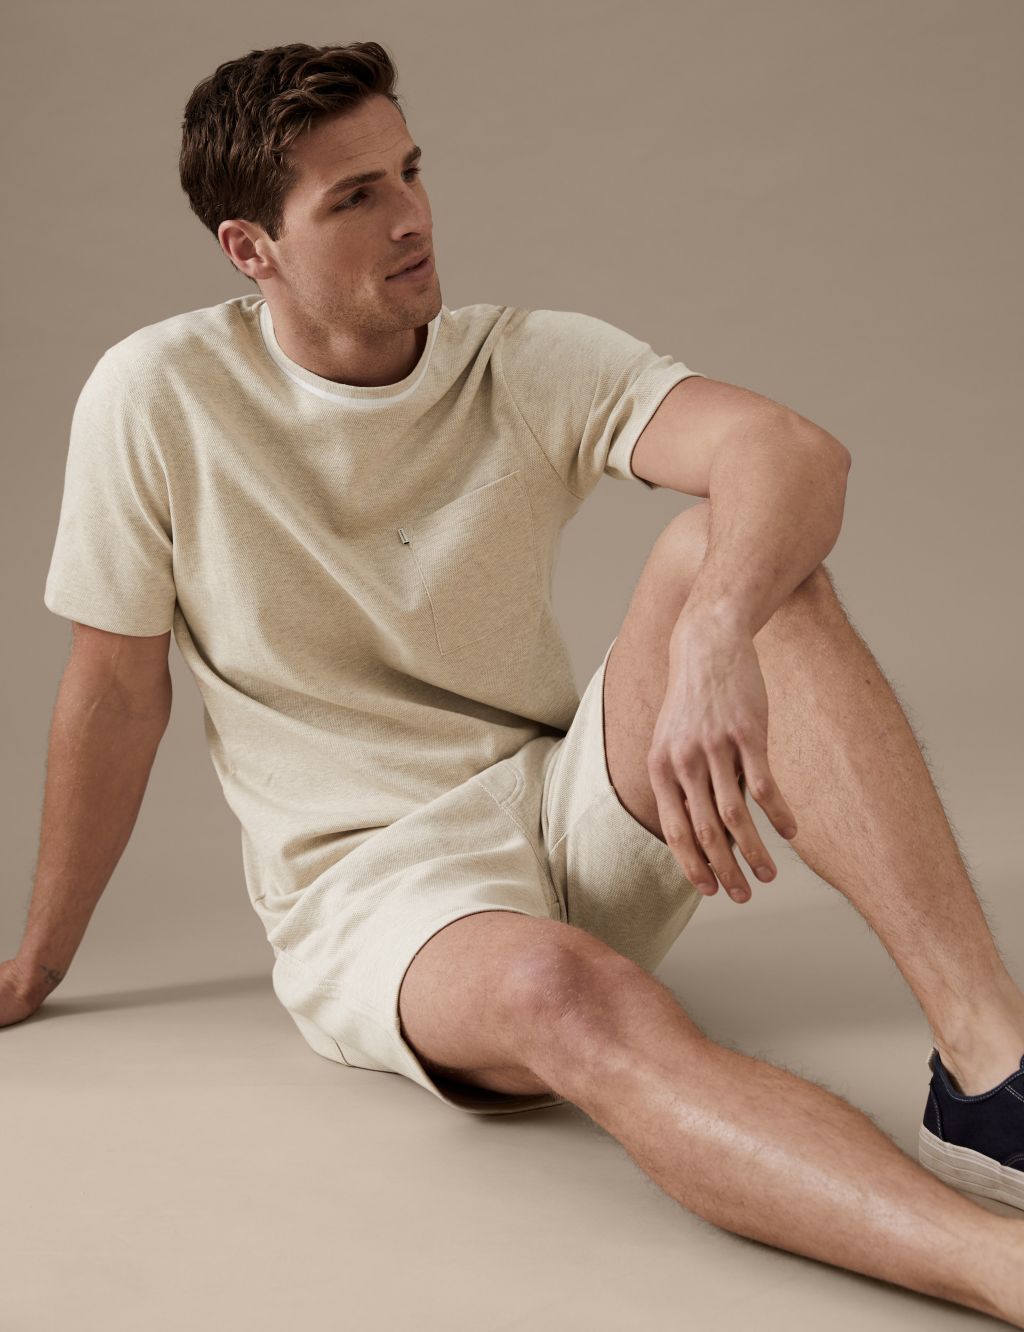 Textured Pure Cotton Jersey Shorts image 5